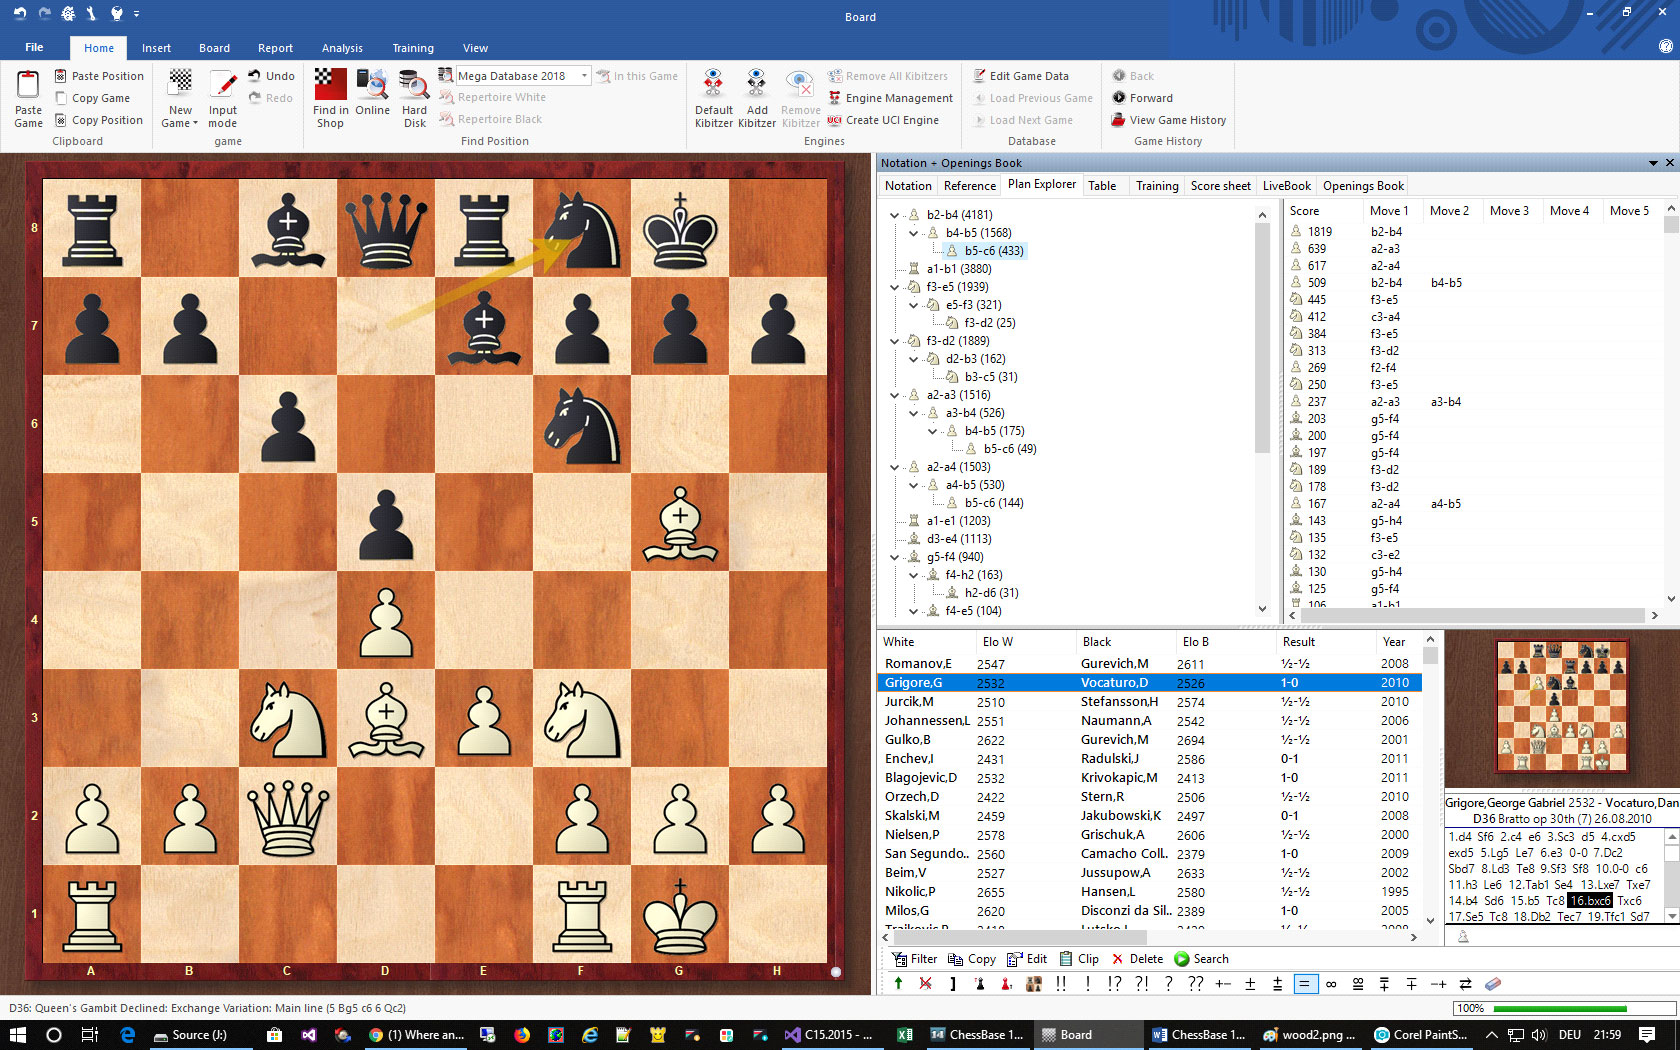 15 Million Games Chess Database download